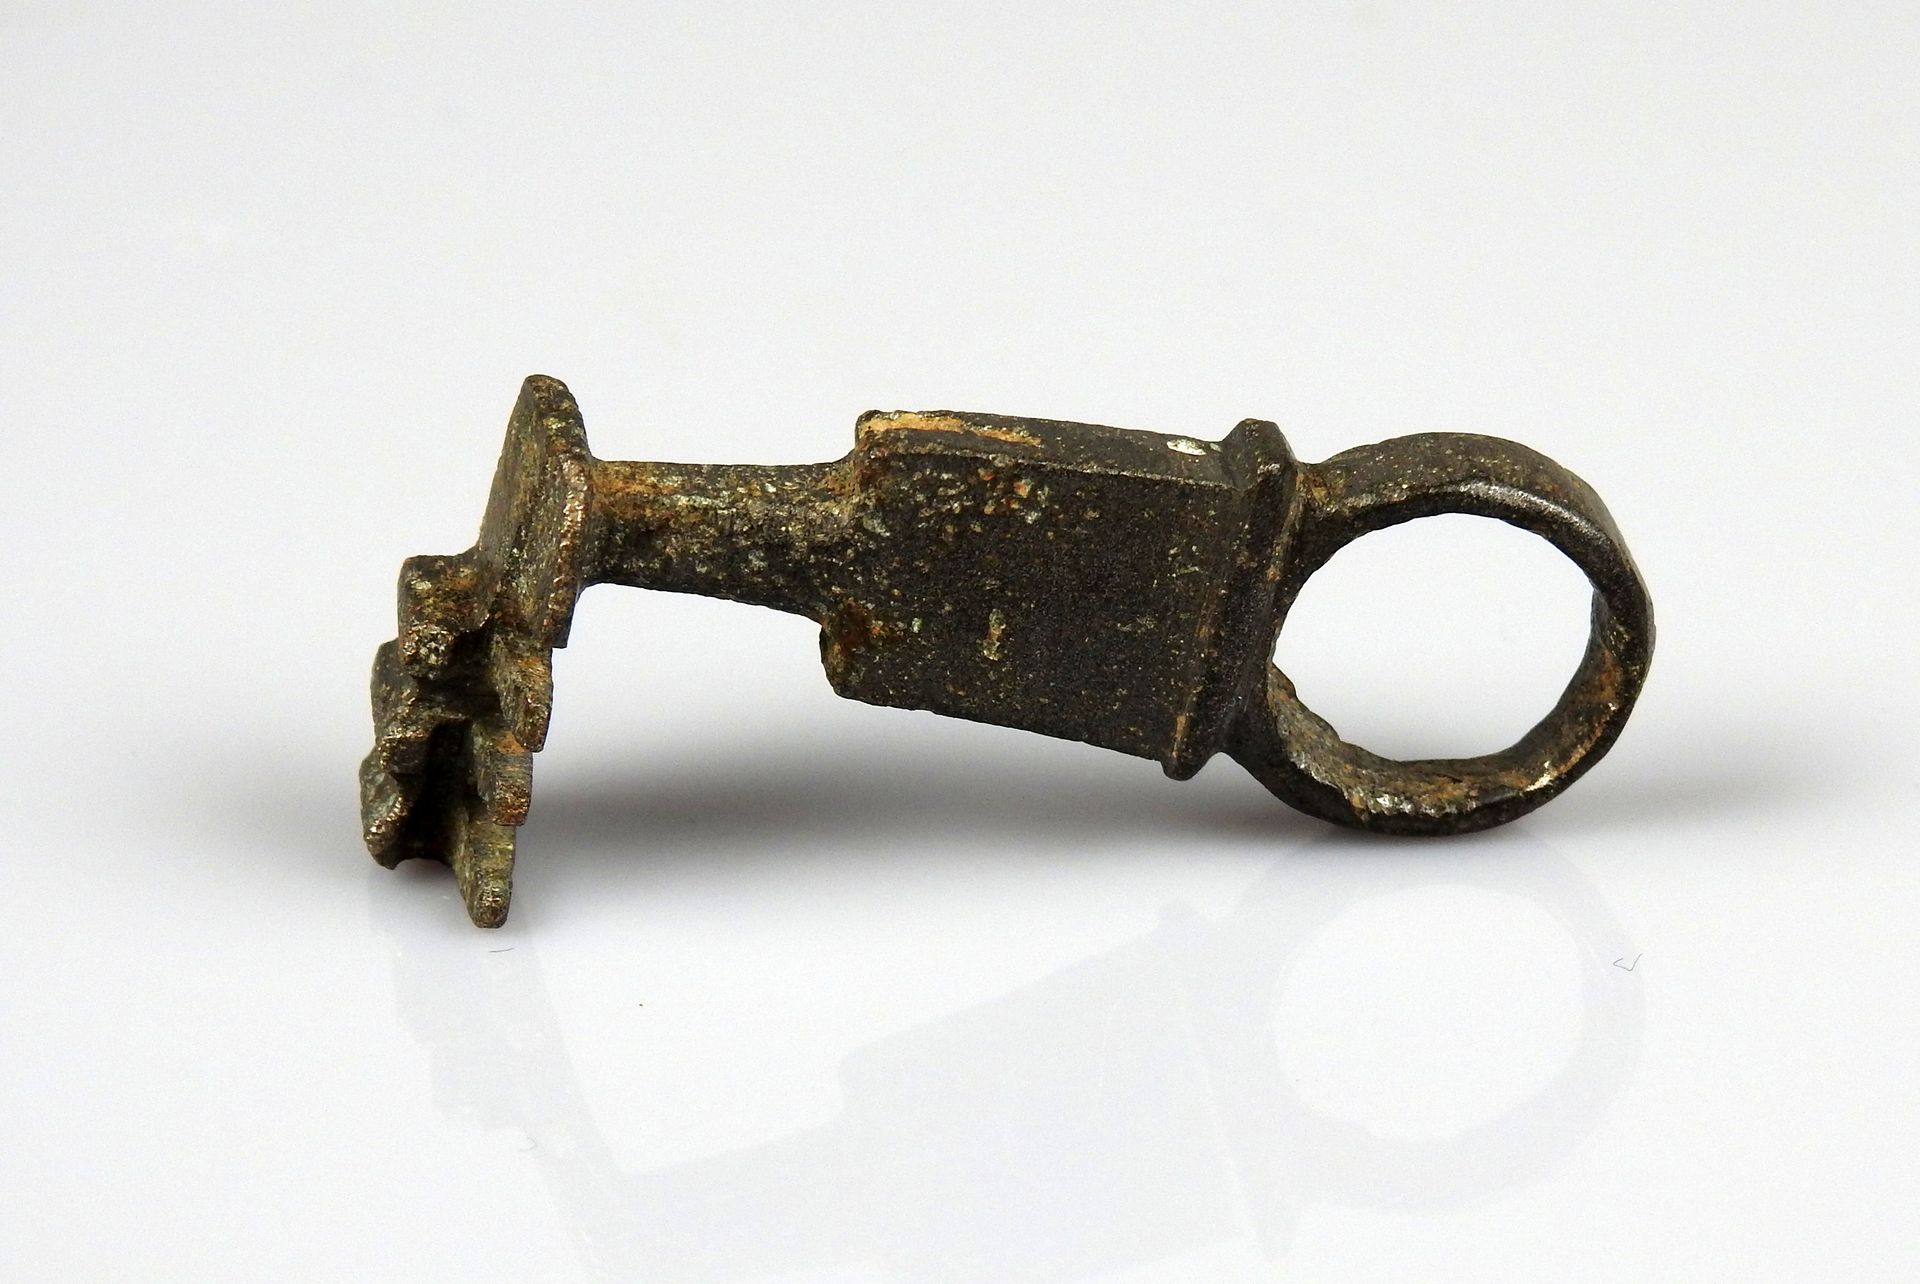 Null Key with solid body ending in a toothed comb

Old collection of a provincia&hellip;